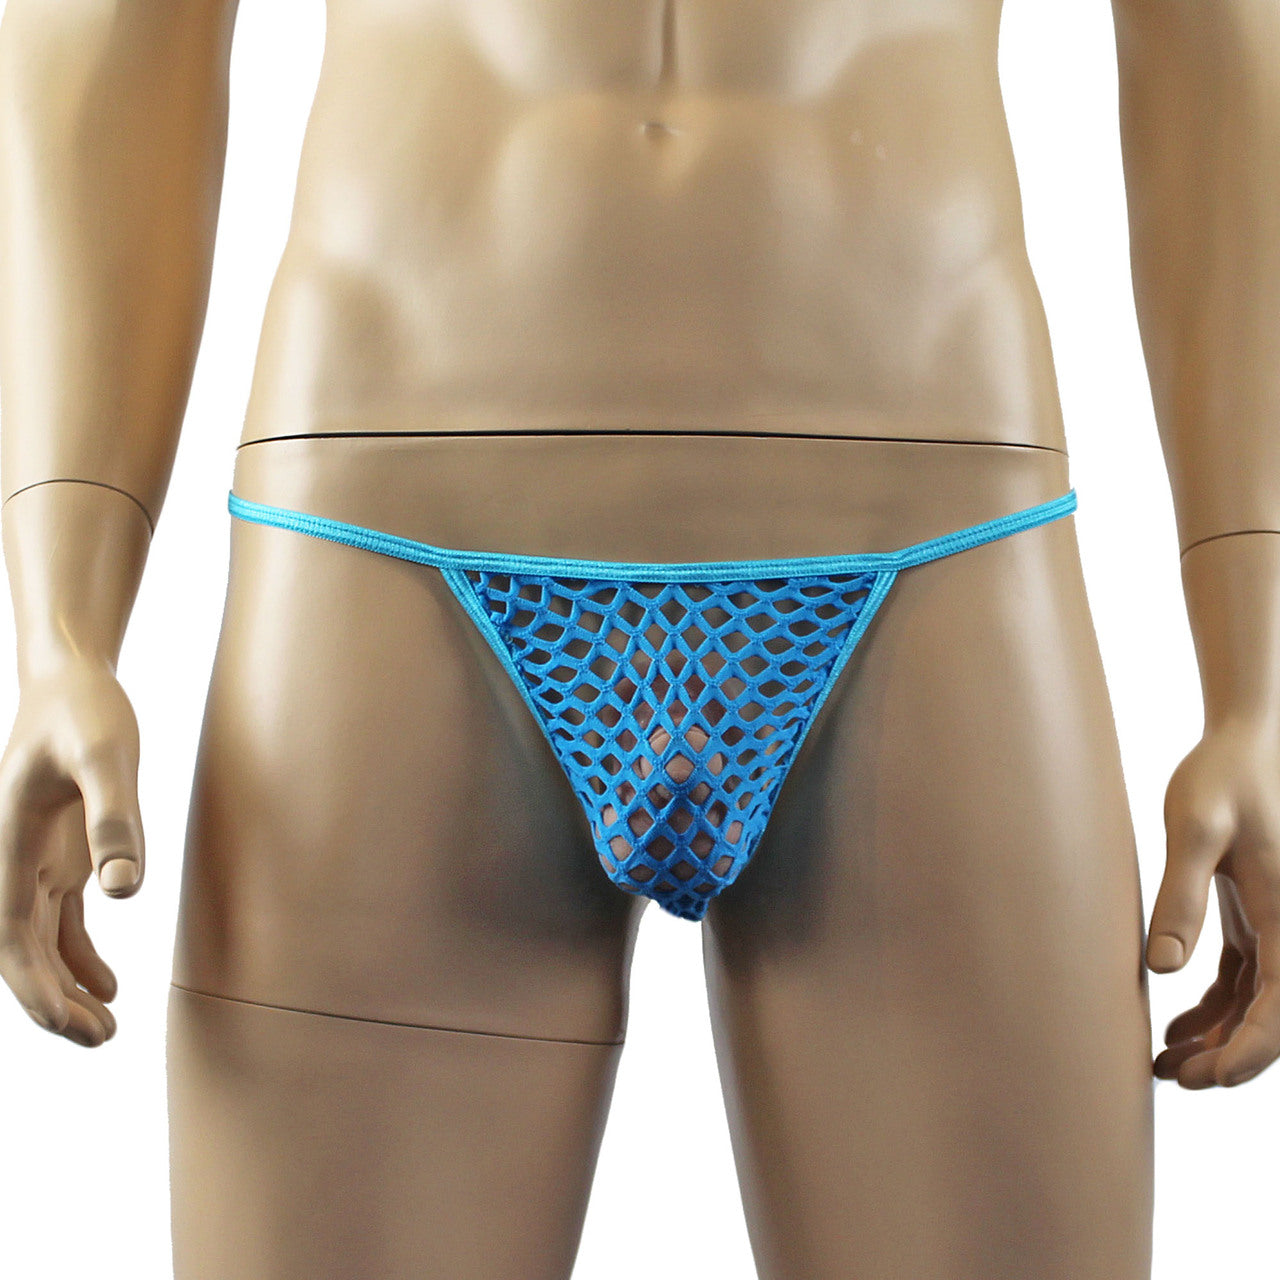 Mens Lingerie See-through Large Net Pouch G string (turquoise plus other colours)